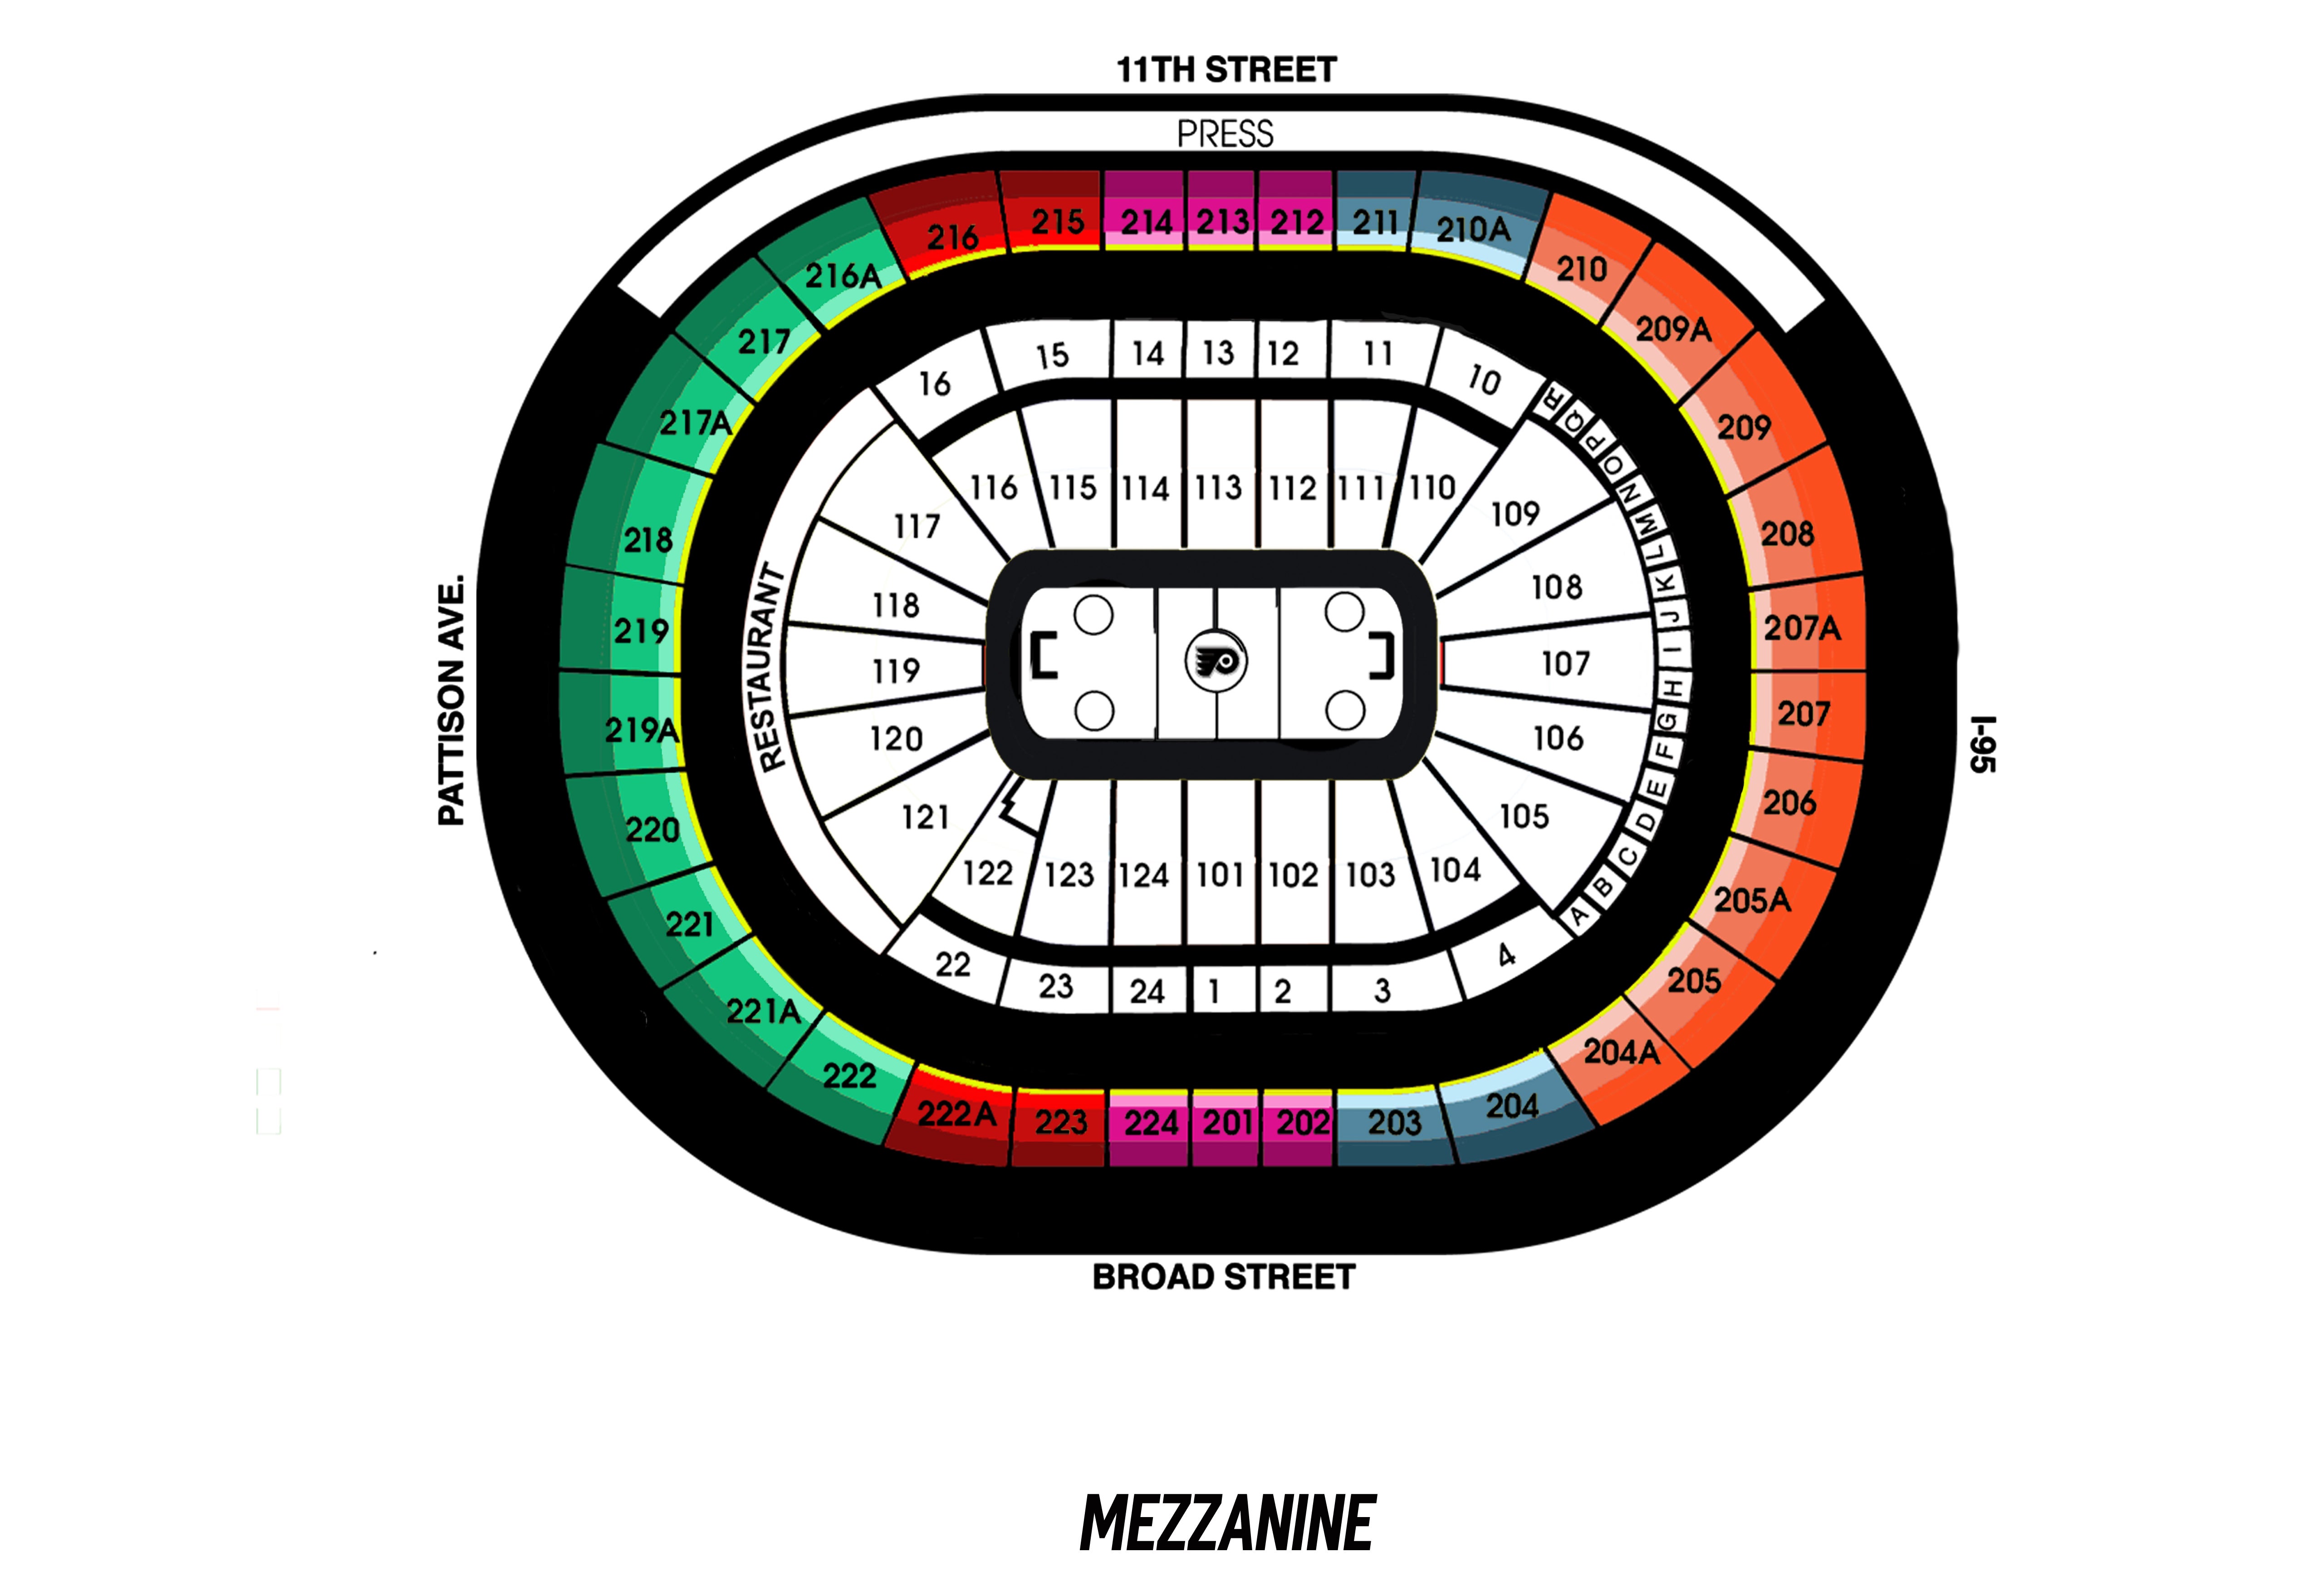 flyers seating map - Togo.wpart.co